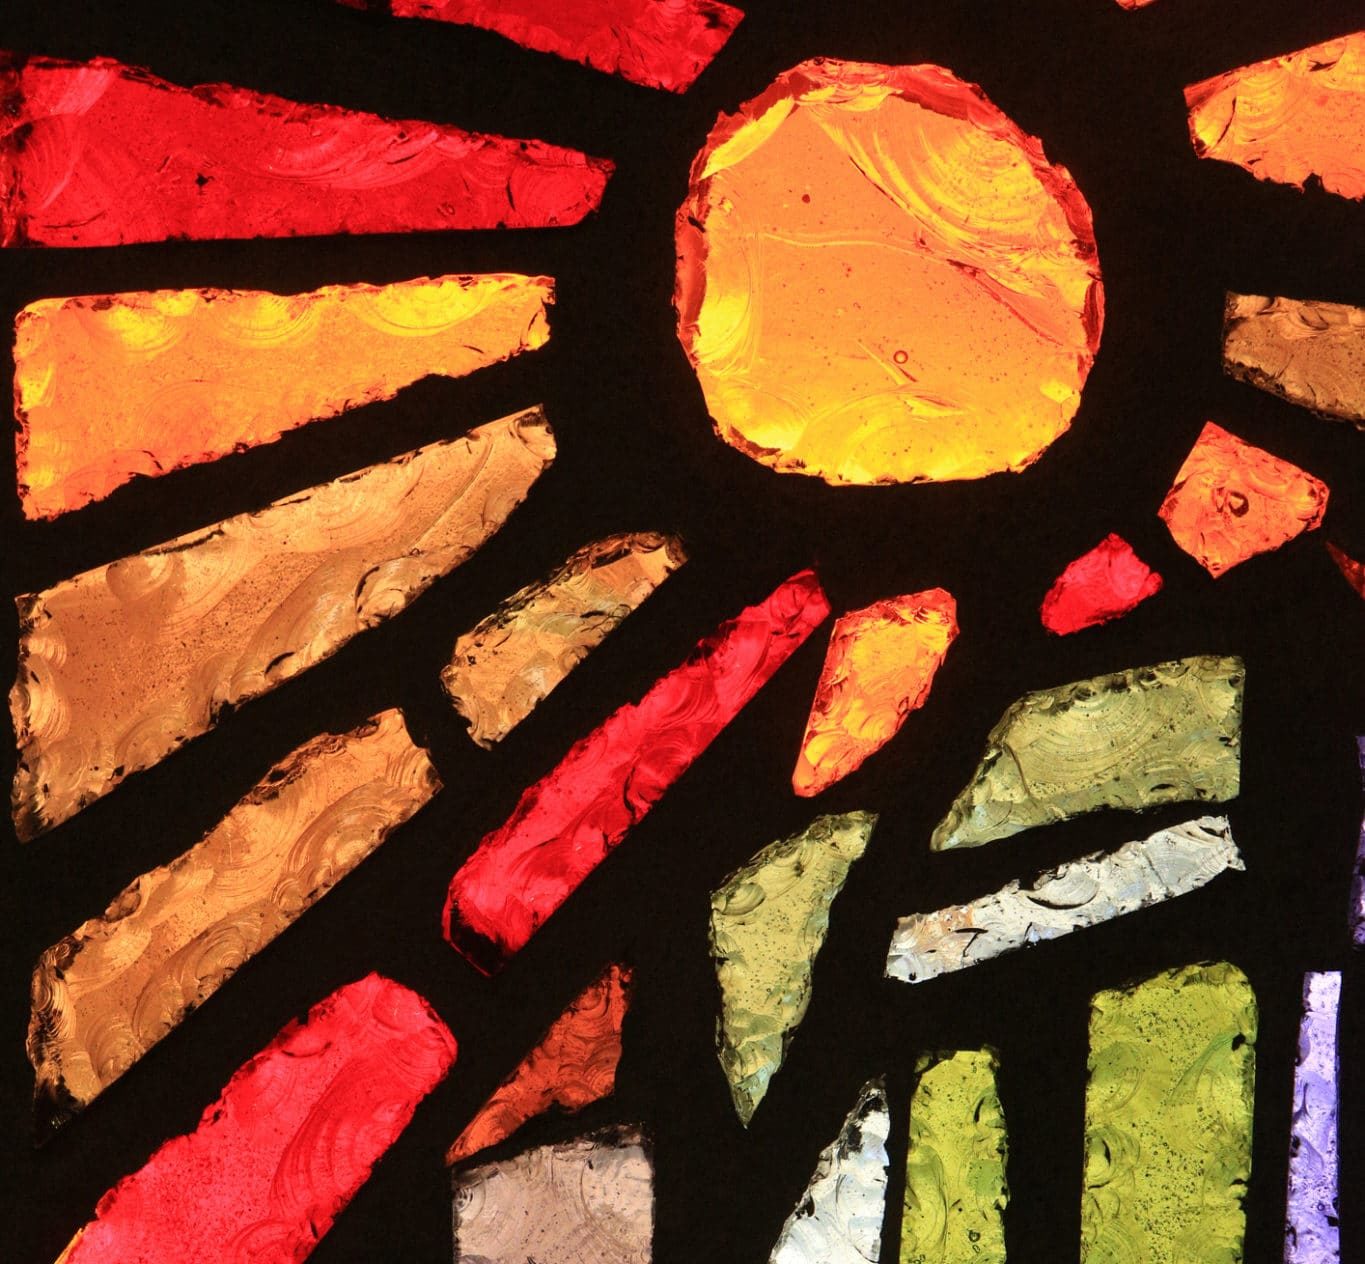 Sun. Stained Glass Window. Basilica Of The Annunciation.